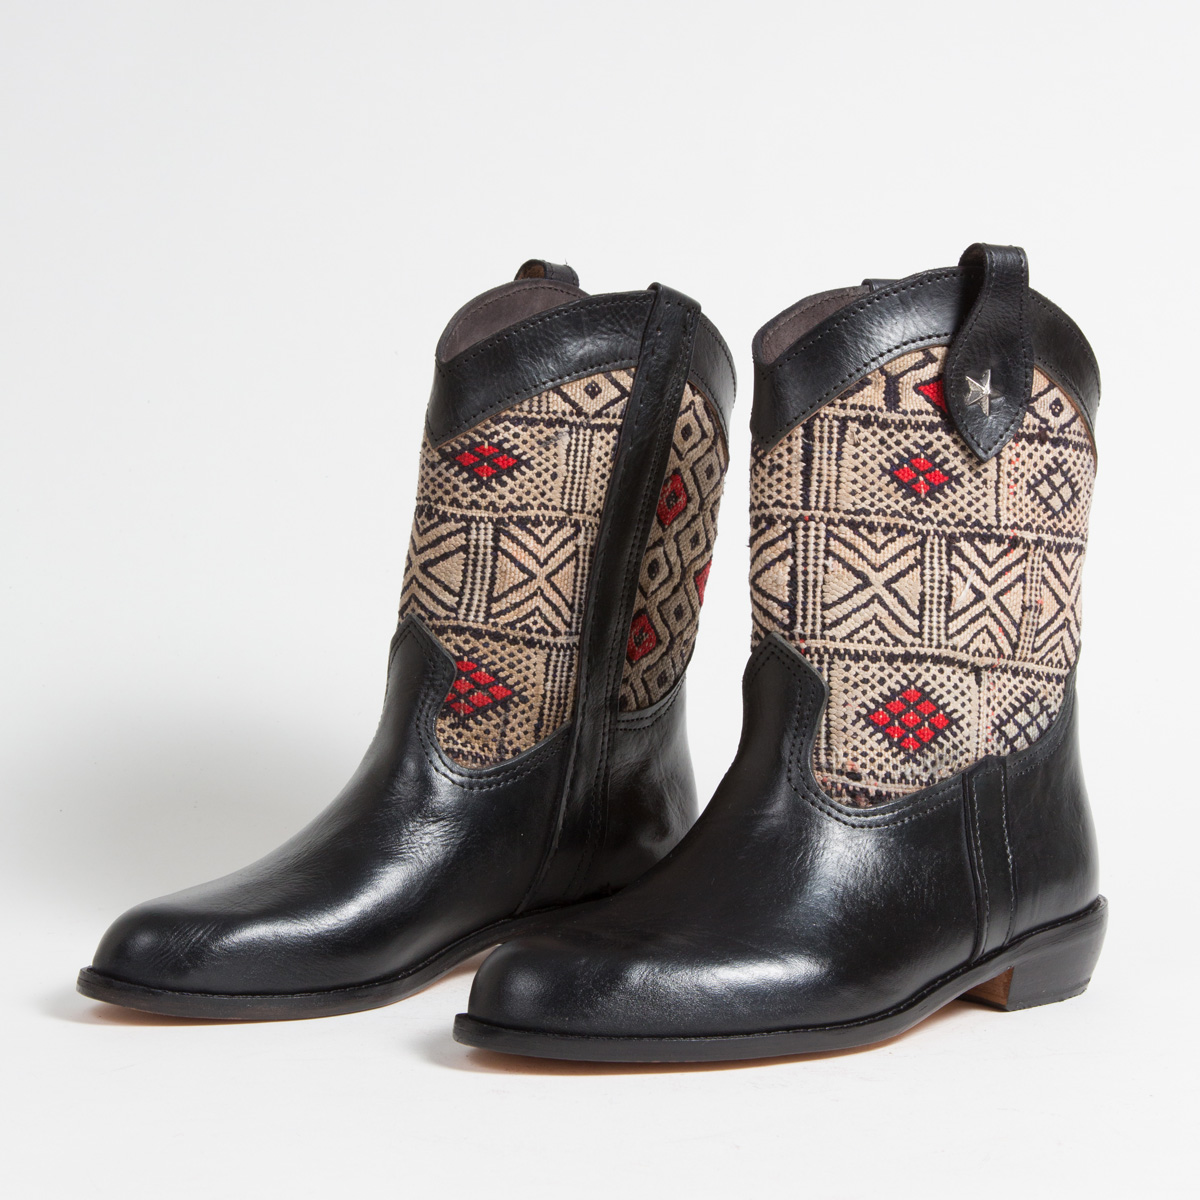 Bottines Kilim cuir mababouche artisanales (Réf. MN13-40)